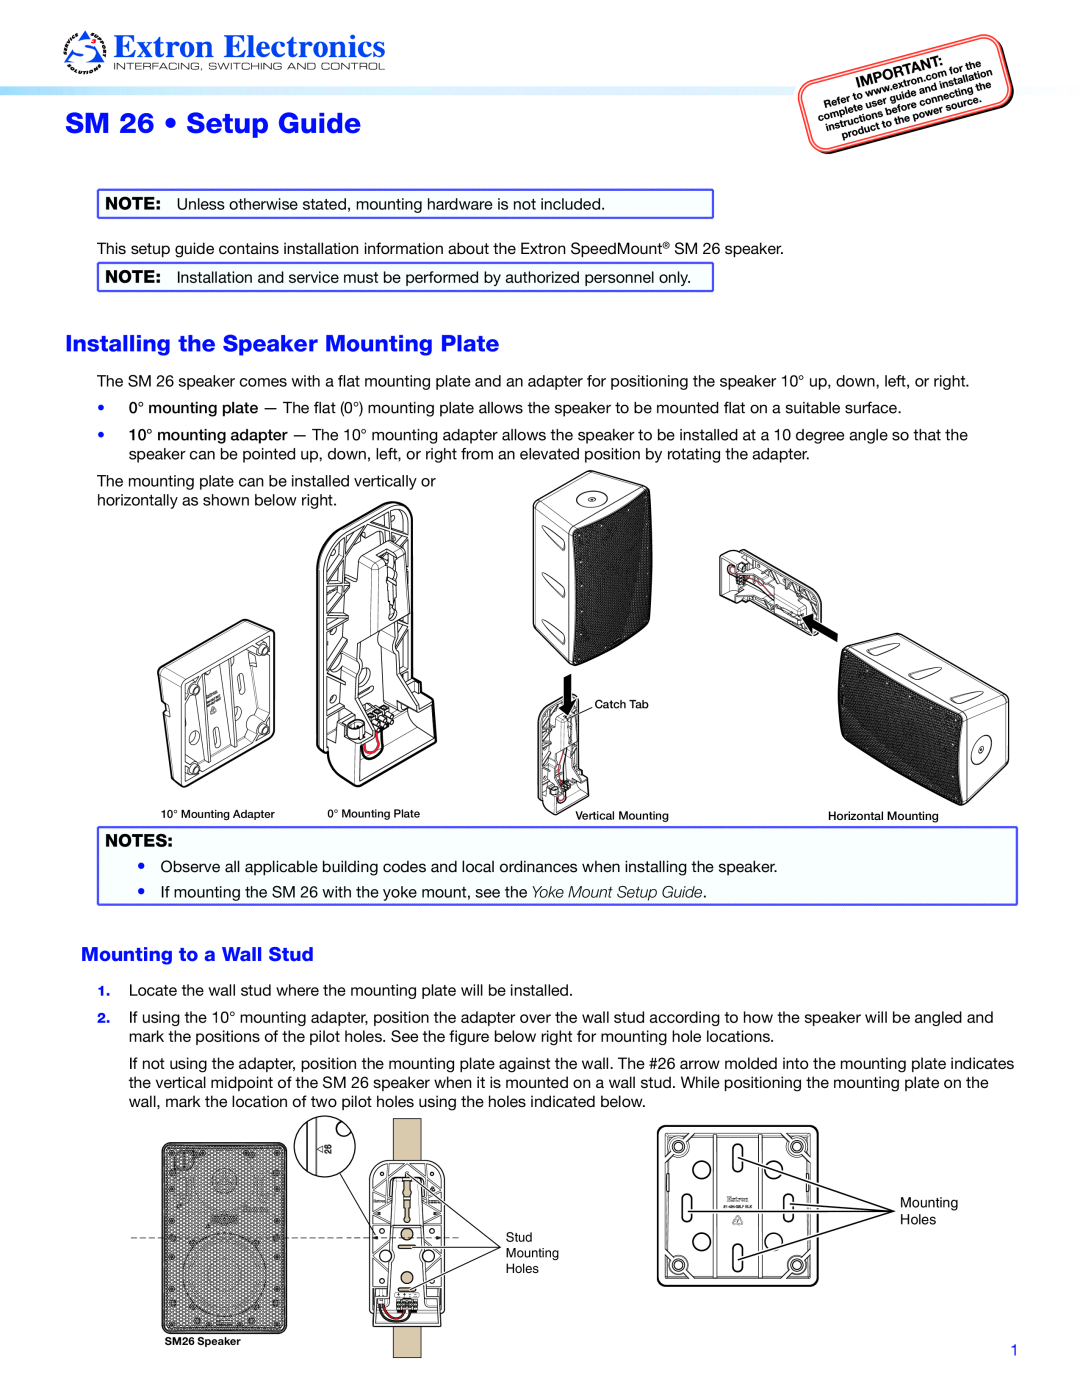 Extron electronic setup guide SM 26 Setup Guide, Installing the Speaker Mounting Plate, Mounting to a Wall Stud 